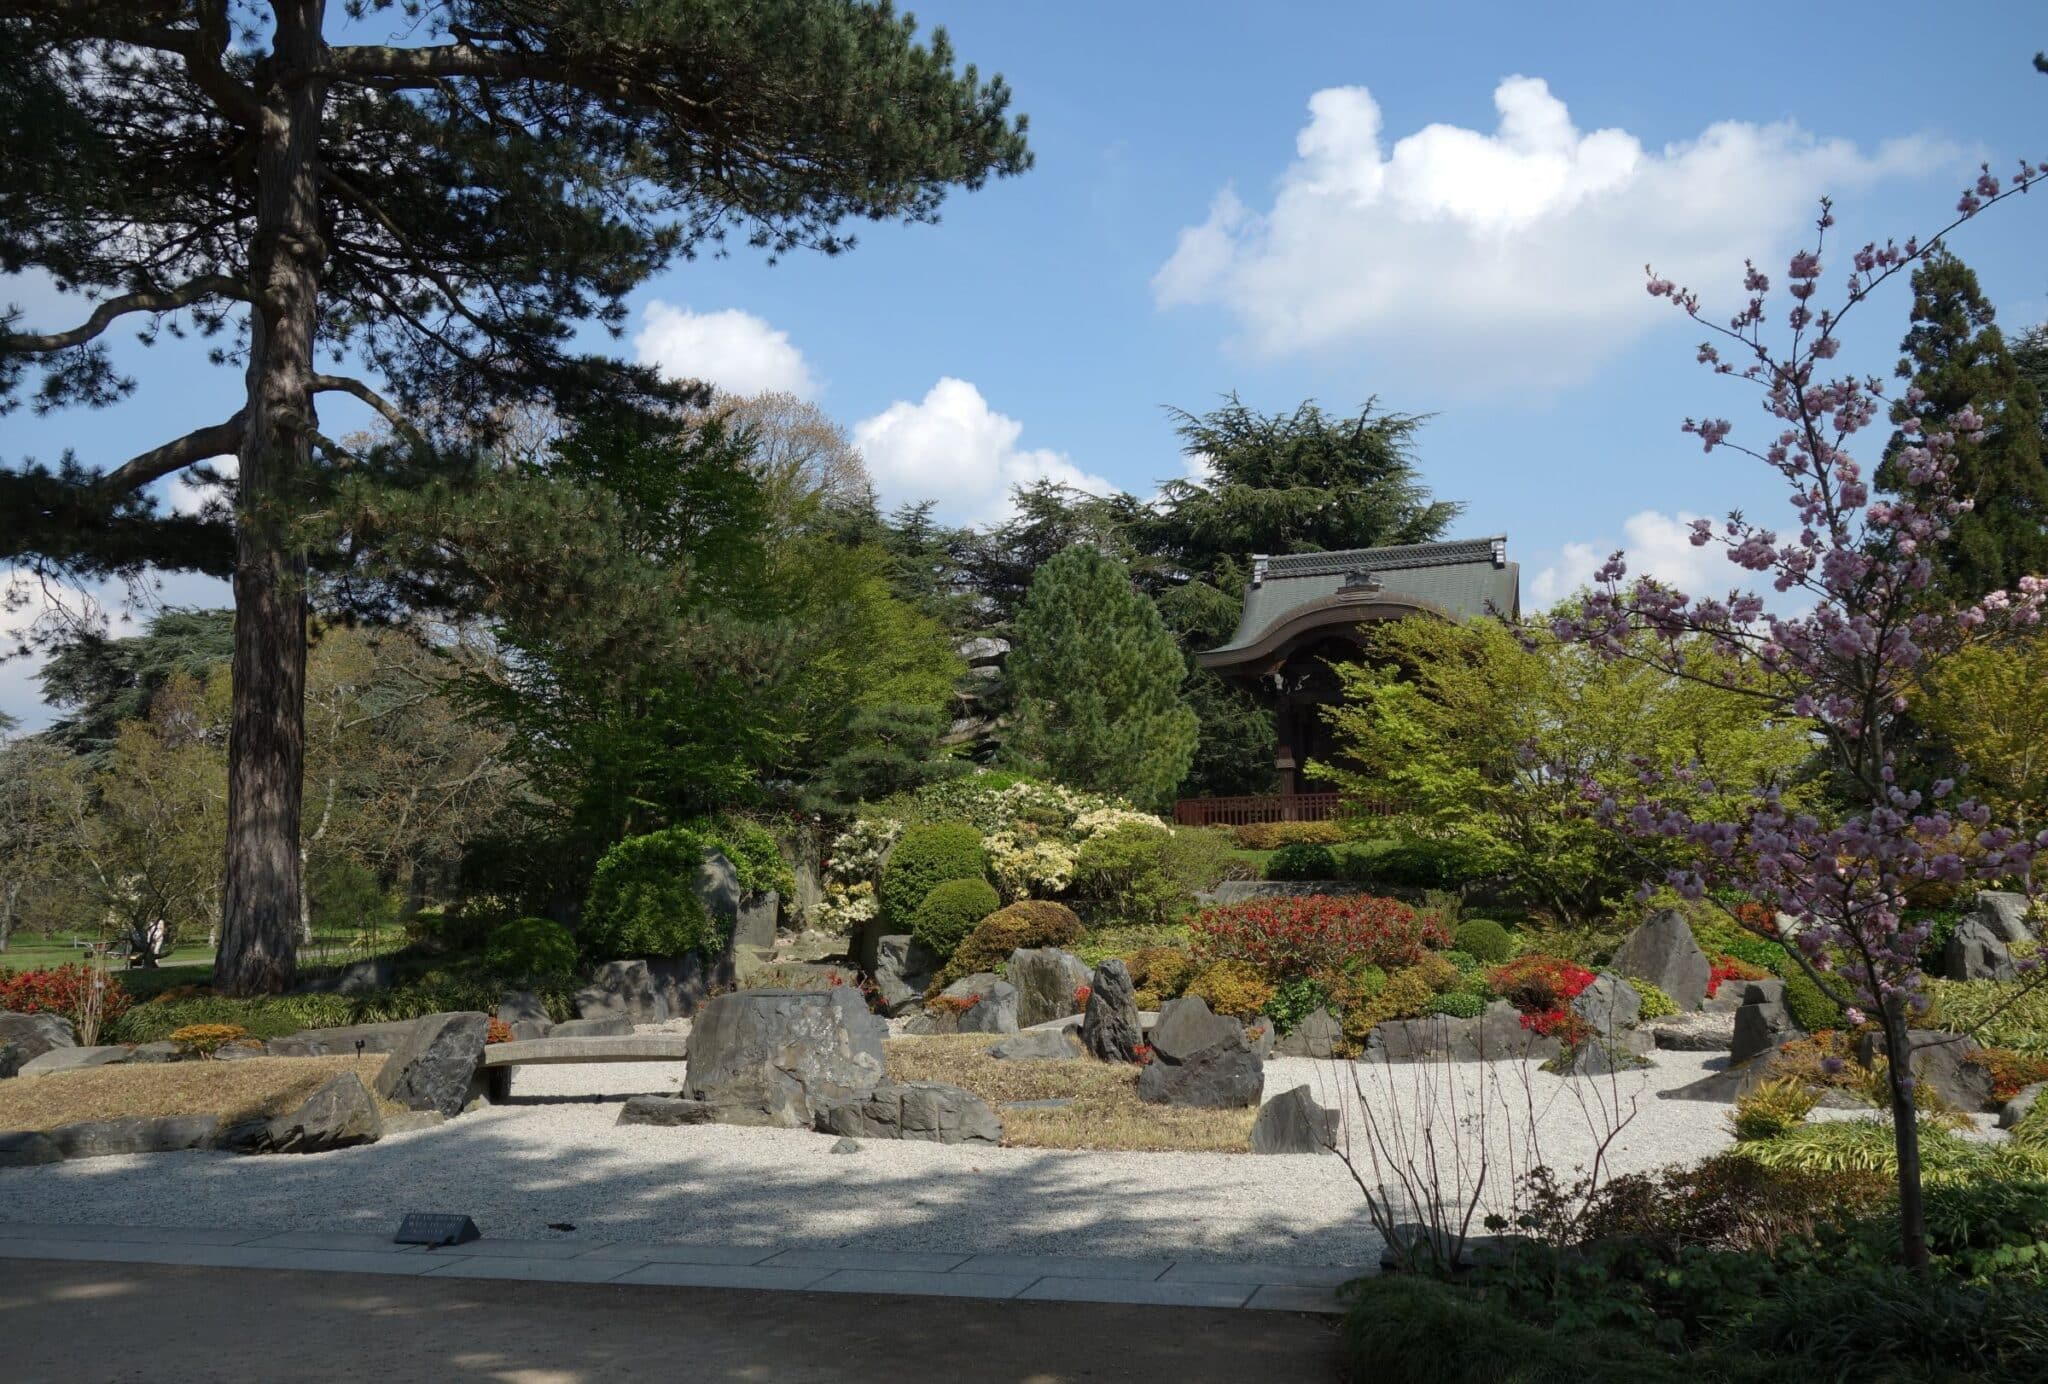 An overview of Kew gardens Japanese landscape.